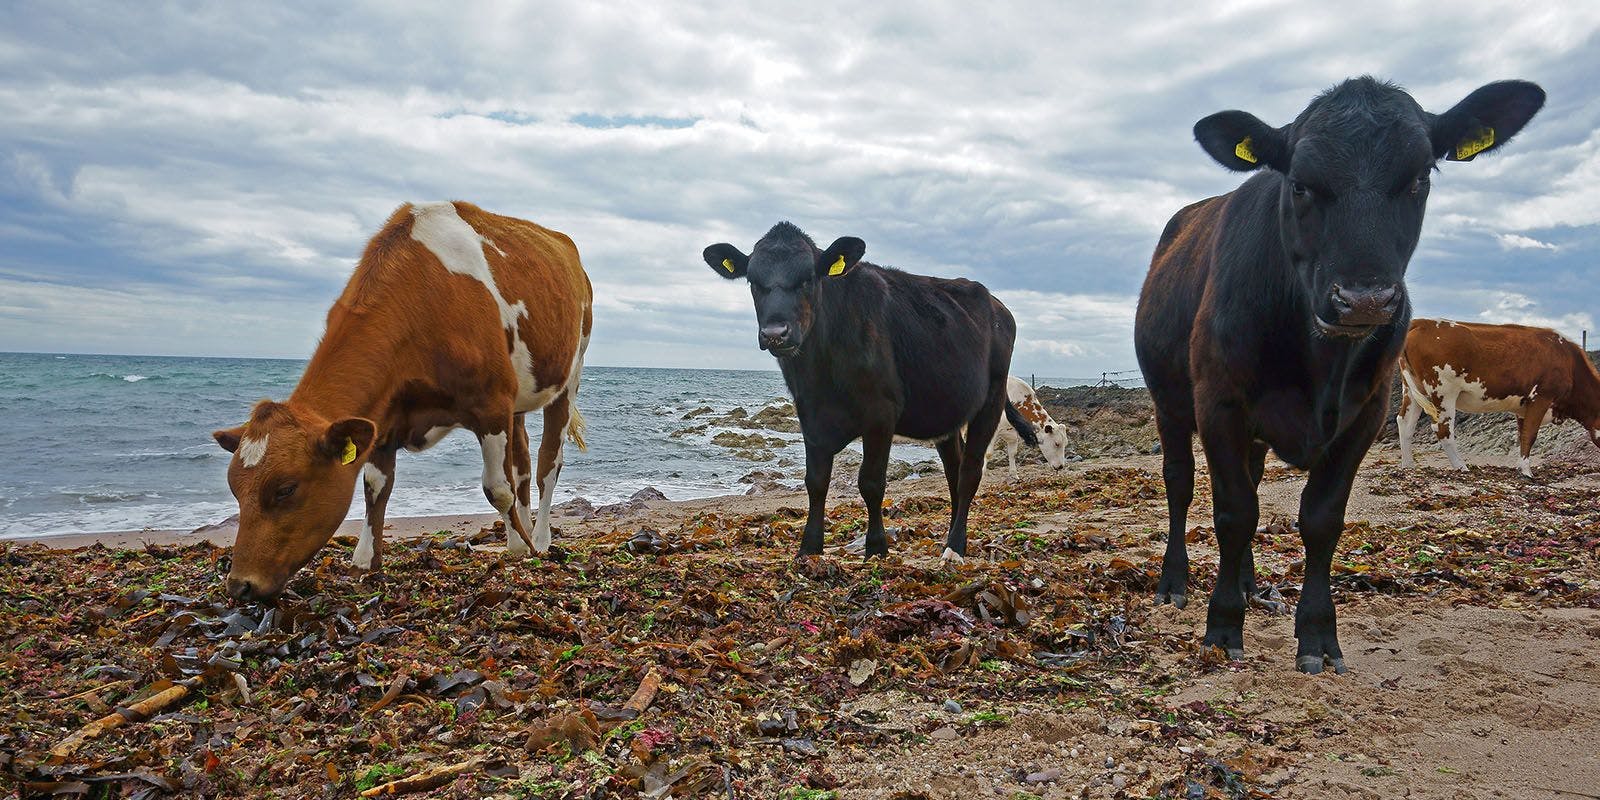 Cattle munch on seaweed on a beach.